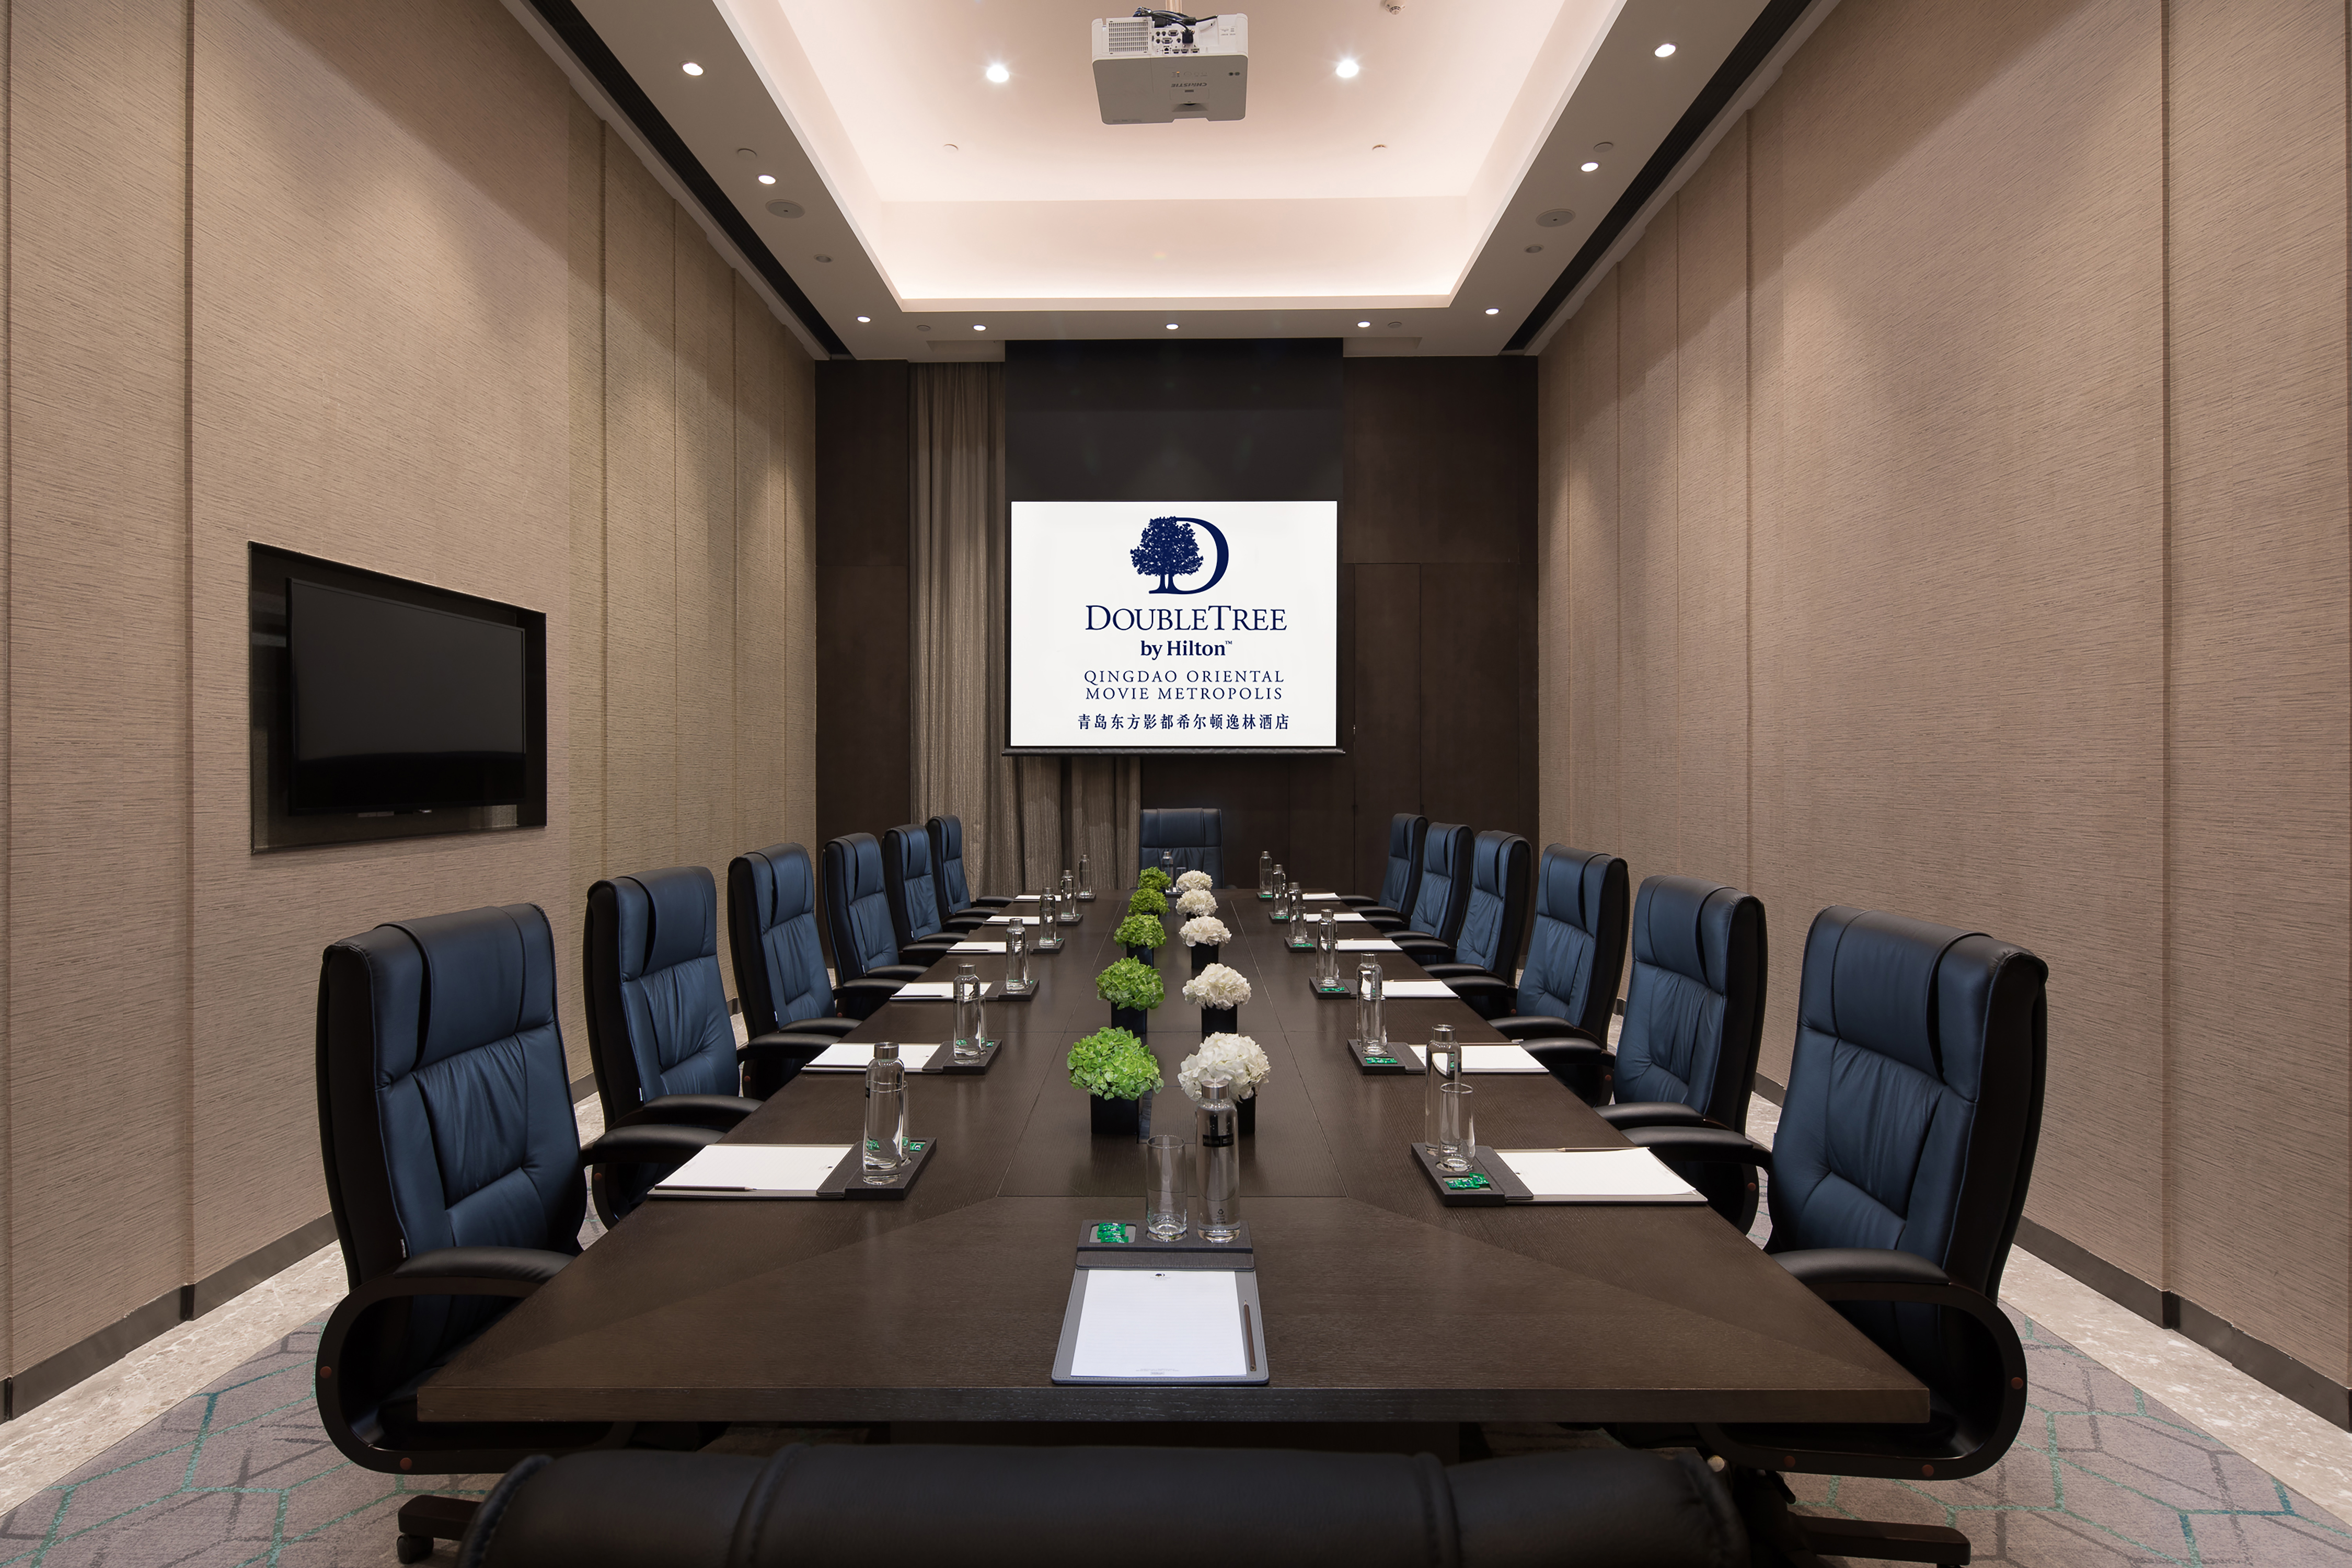 Meeting room with chairs and projector